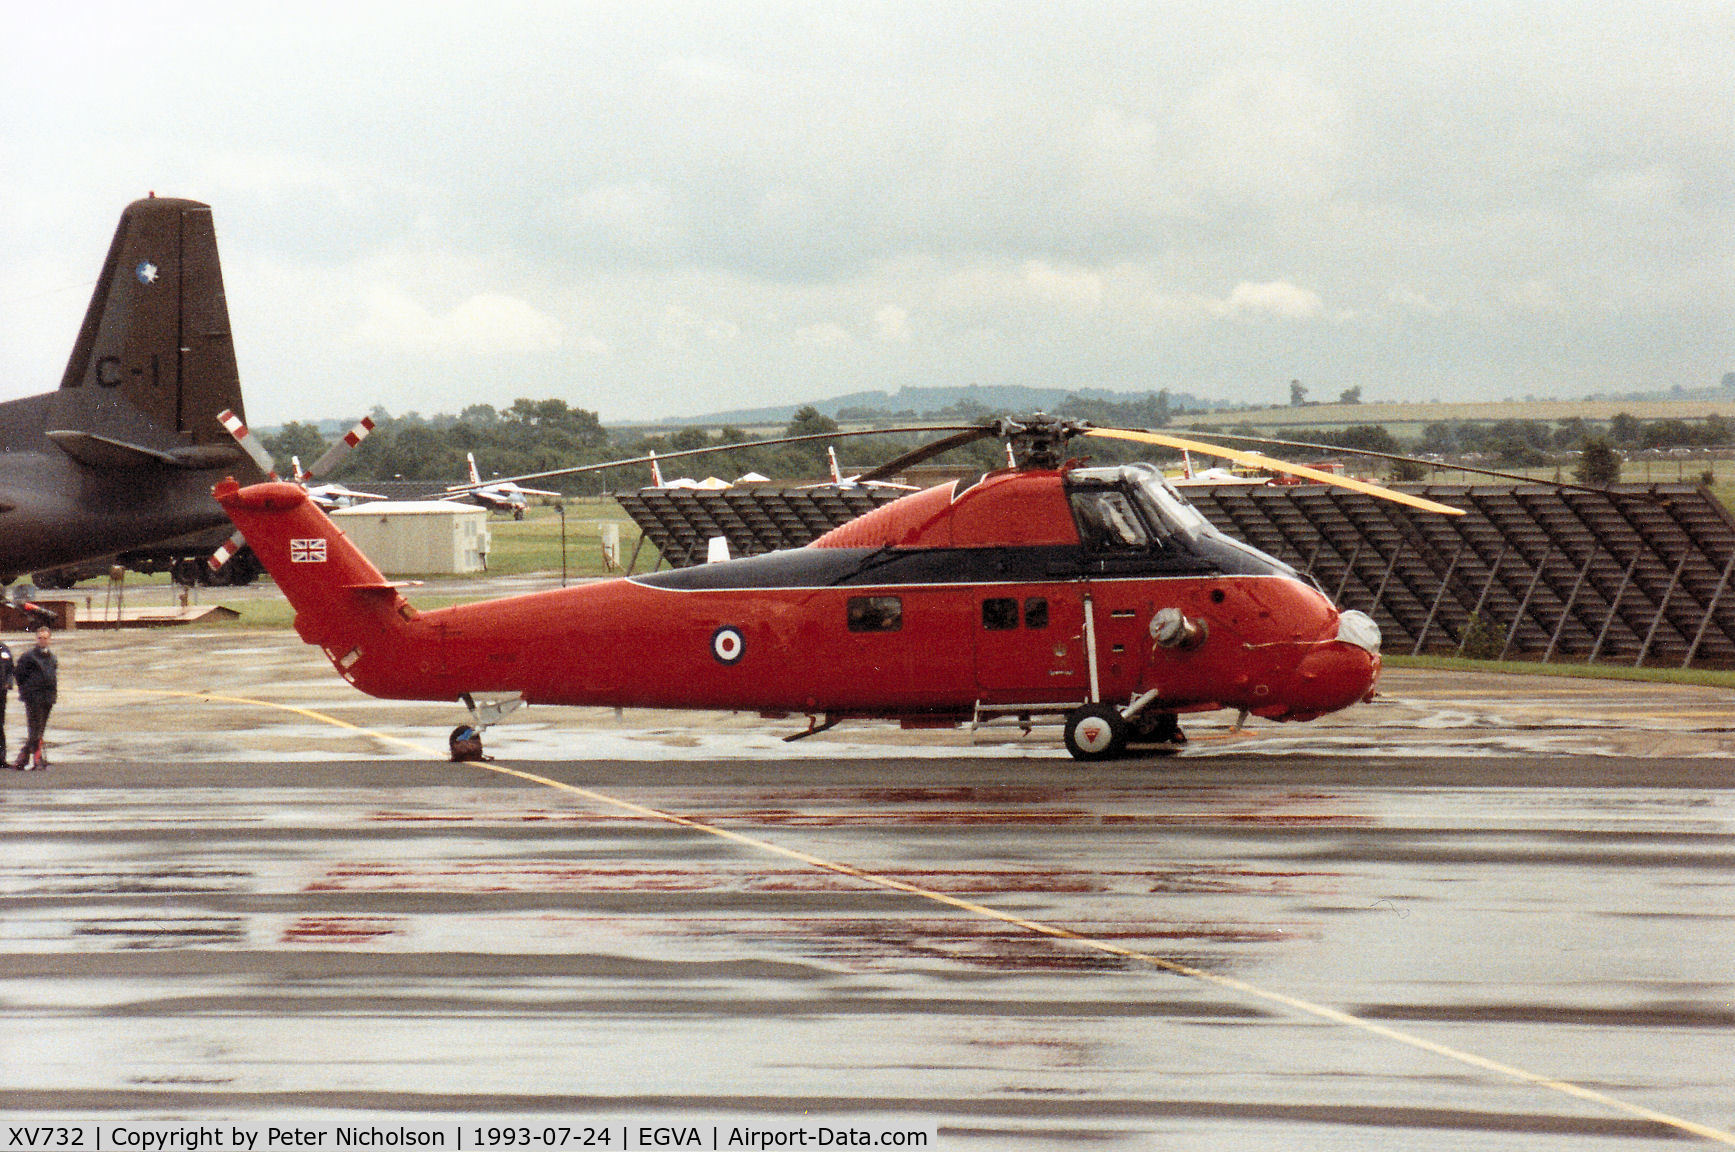 XV732, 1969 Westland Wessex HCC.4 C/N WA627, Wessex HCC.4, callsign Kitty 8, of the Queen's Flight on the flight-line at the 1993 Intnl Air Tattoo at RAF Fairford.